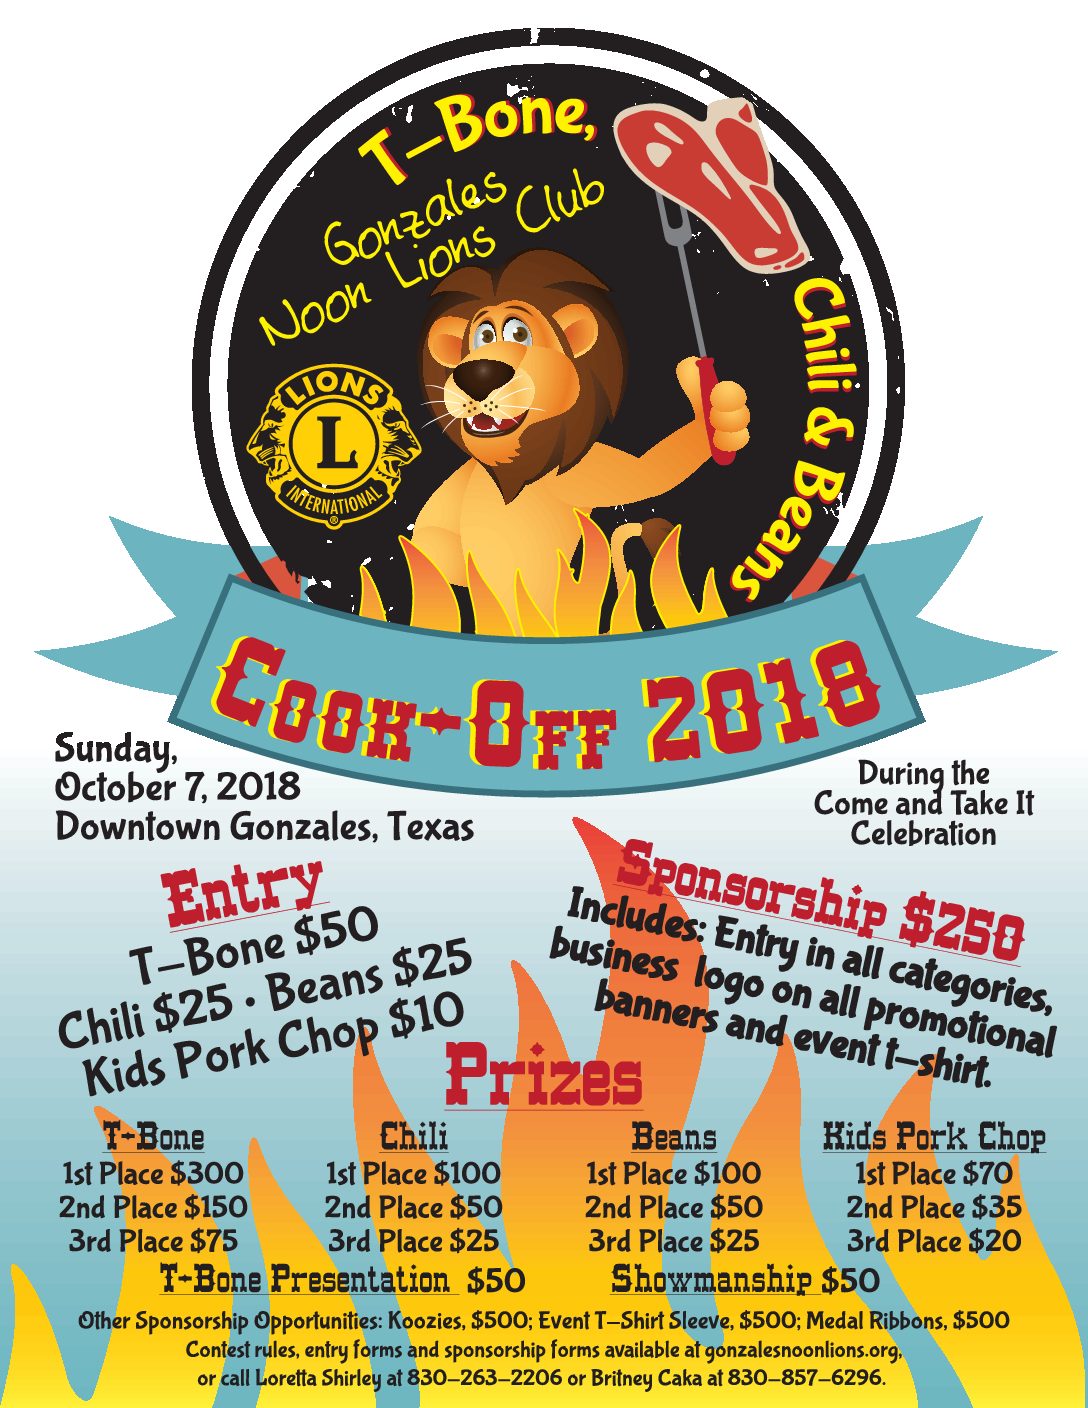 The Official Come and Take It Festival in Gonzales, Texas